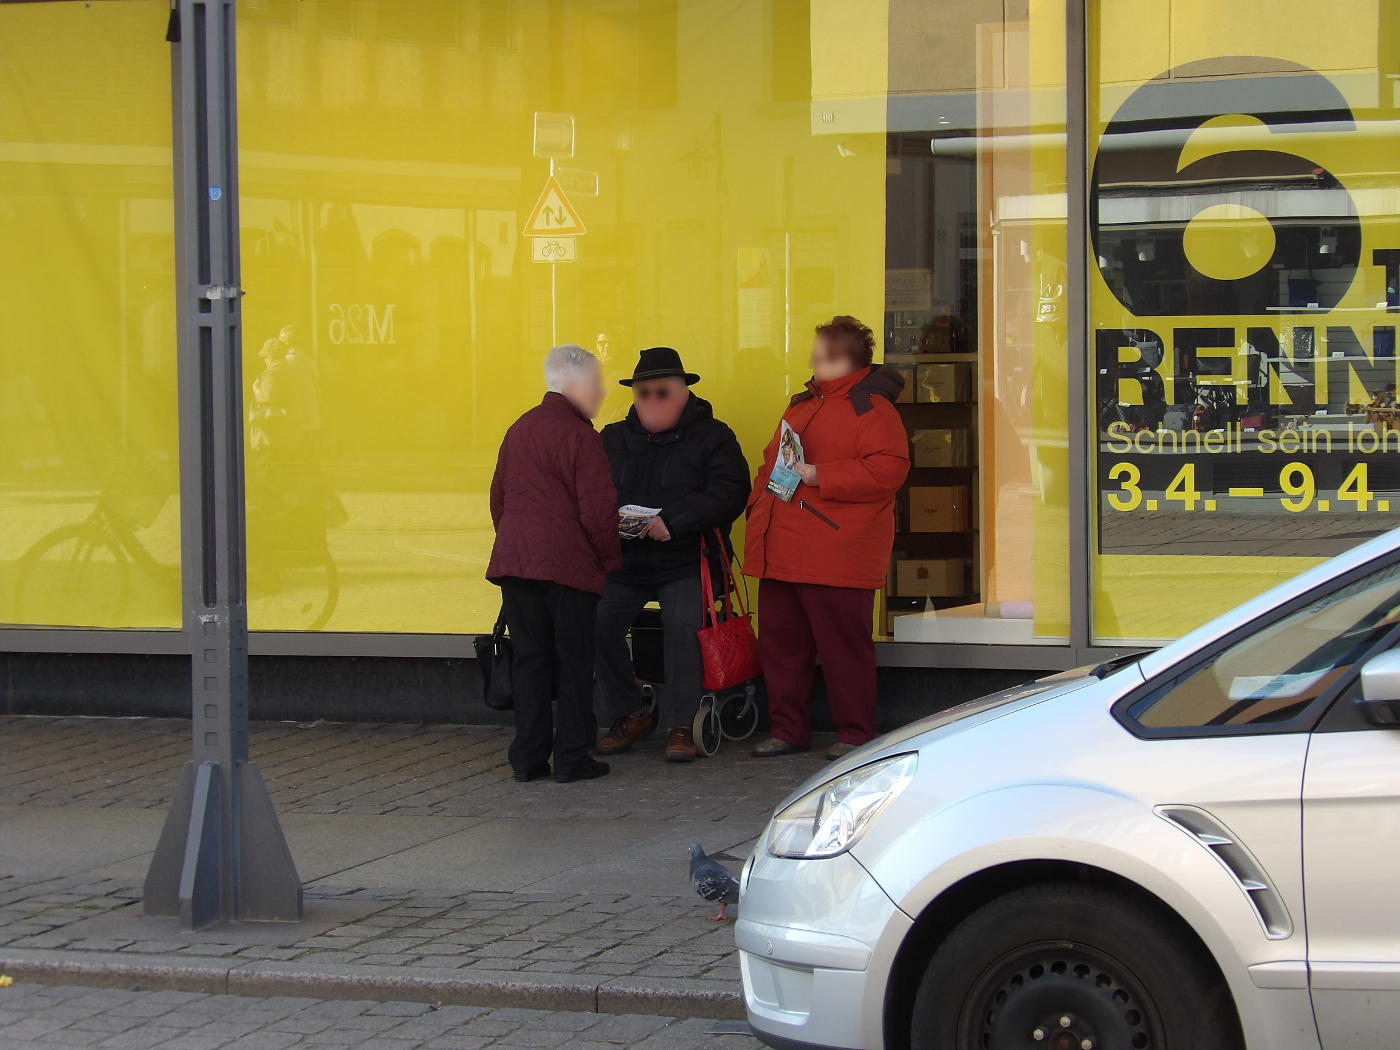 Speyer as good as Jehovah's Witnesses-free and in Wiesloch you can hardly find them any more